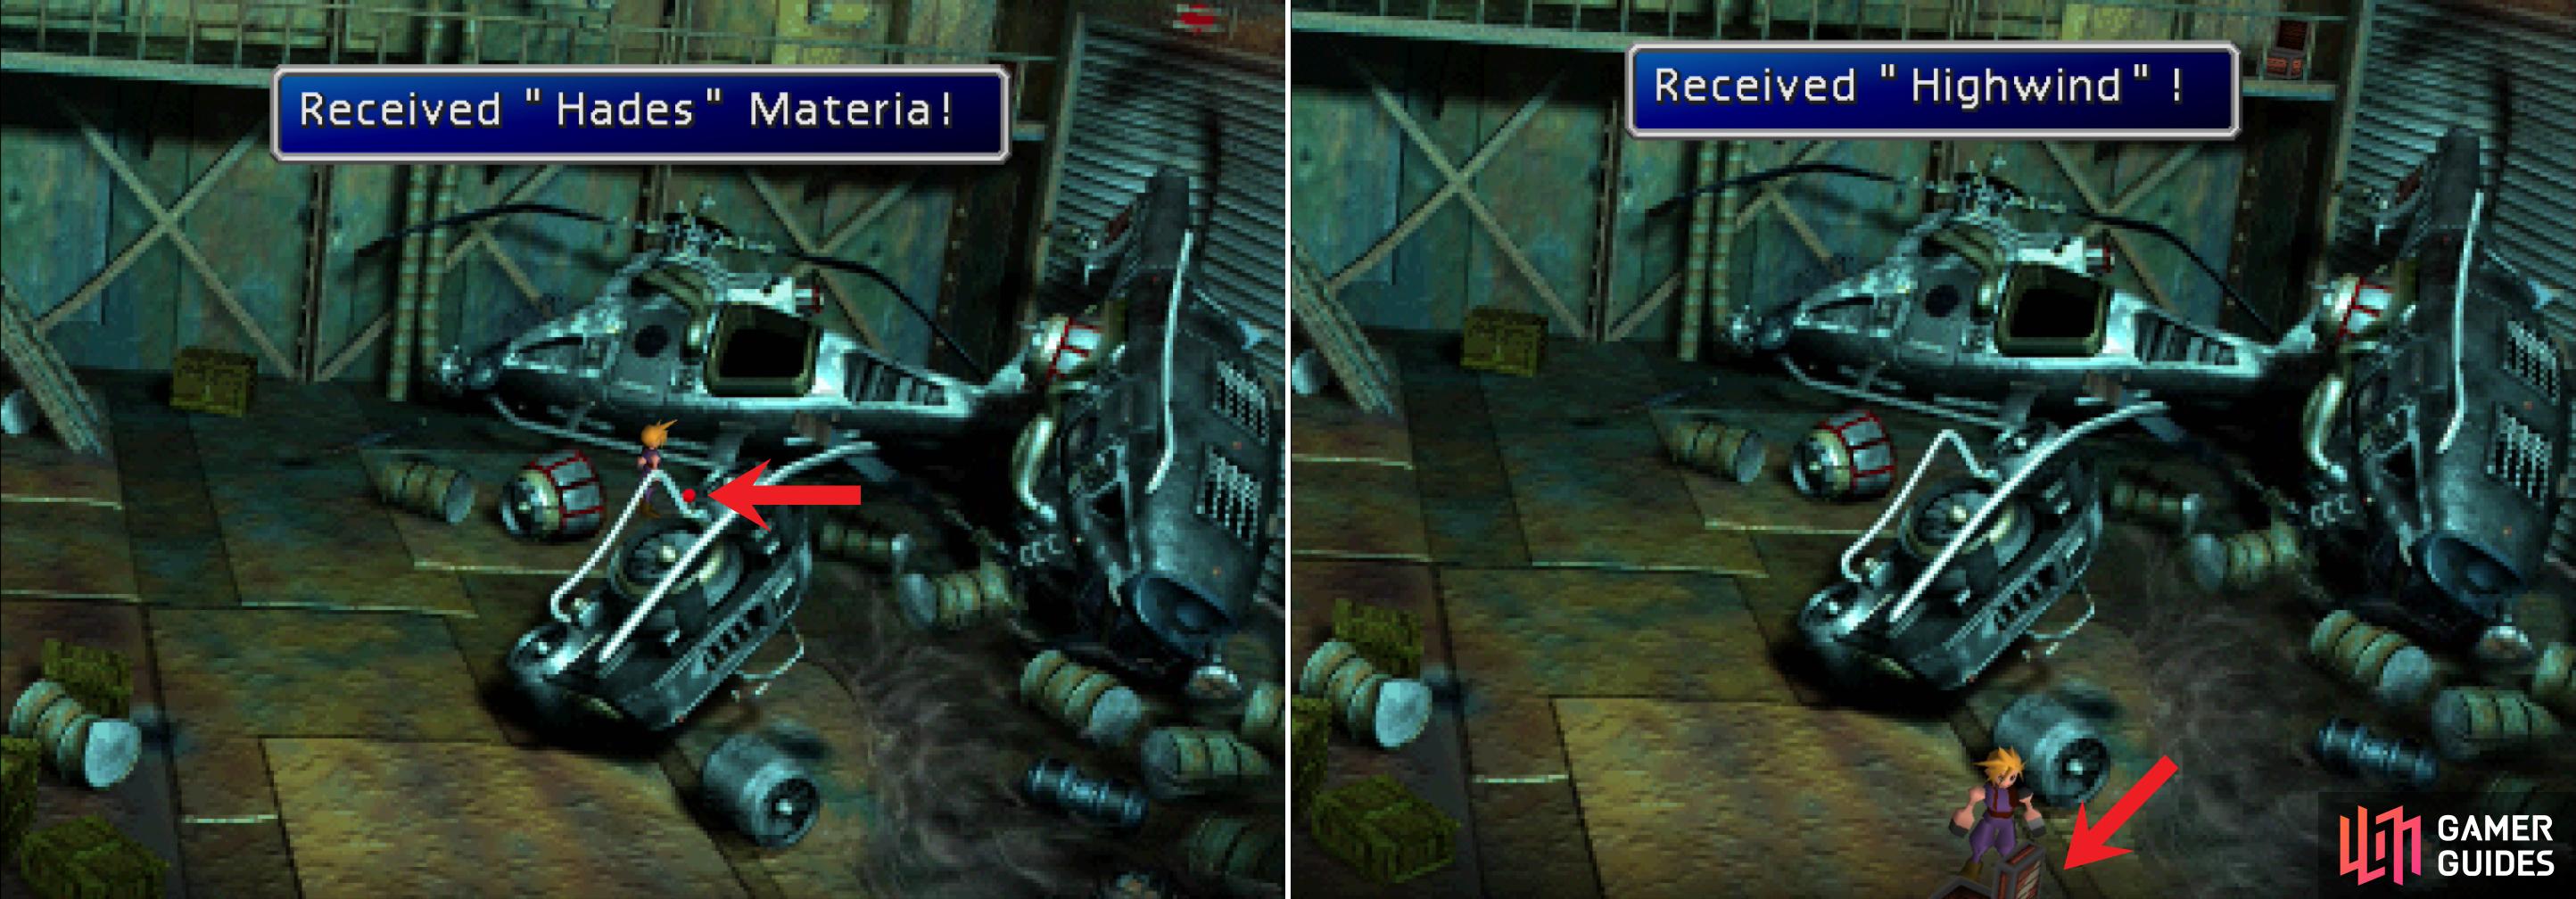 Find a piece of Hades Materia near a ruined helicoptor in the Cargo Room (left) then find Cid's ultimate Limit Break "Highwind" in a chest along the southern end of the Cargo Room (right).